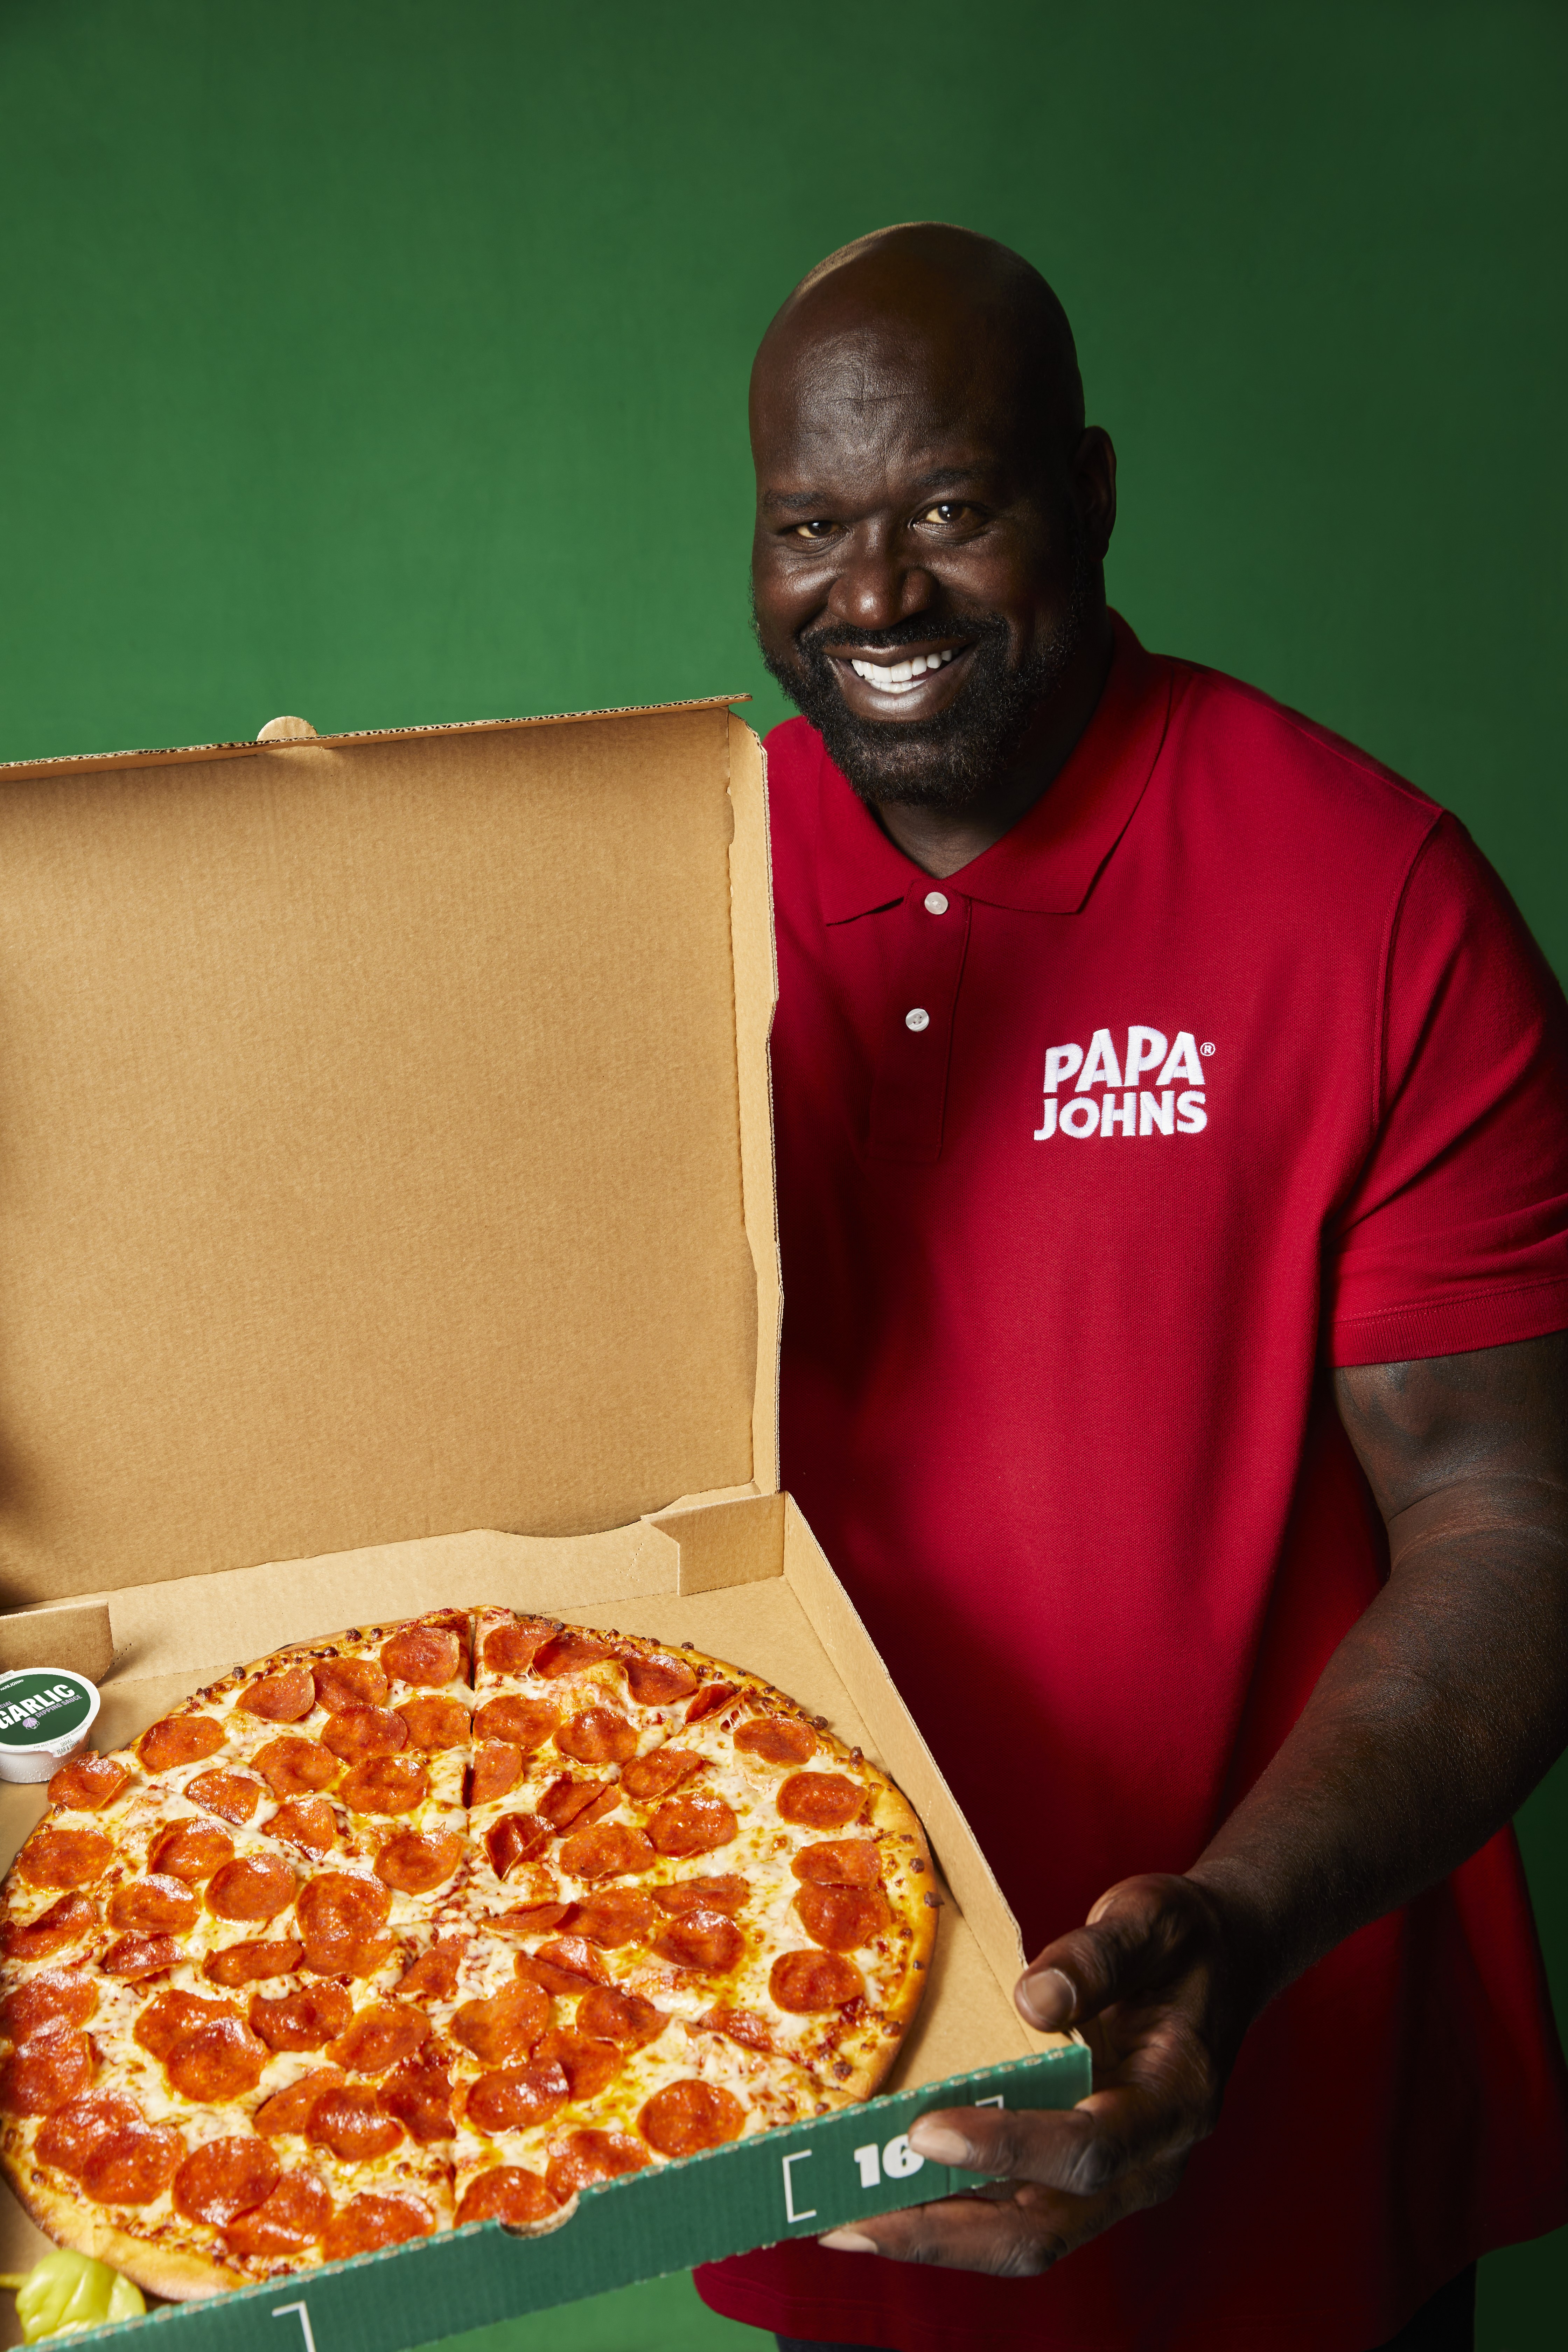 'PIZZA WITH PURPOSE': THE SHAQ-A-RONI IS COMING